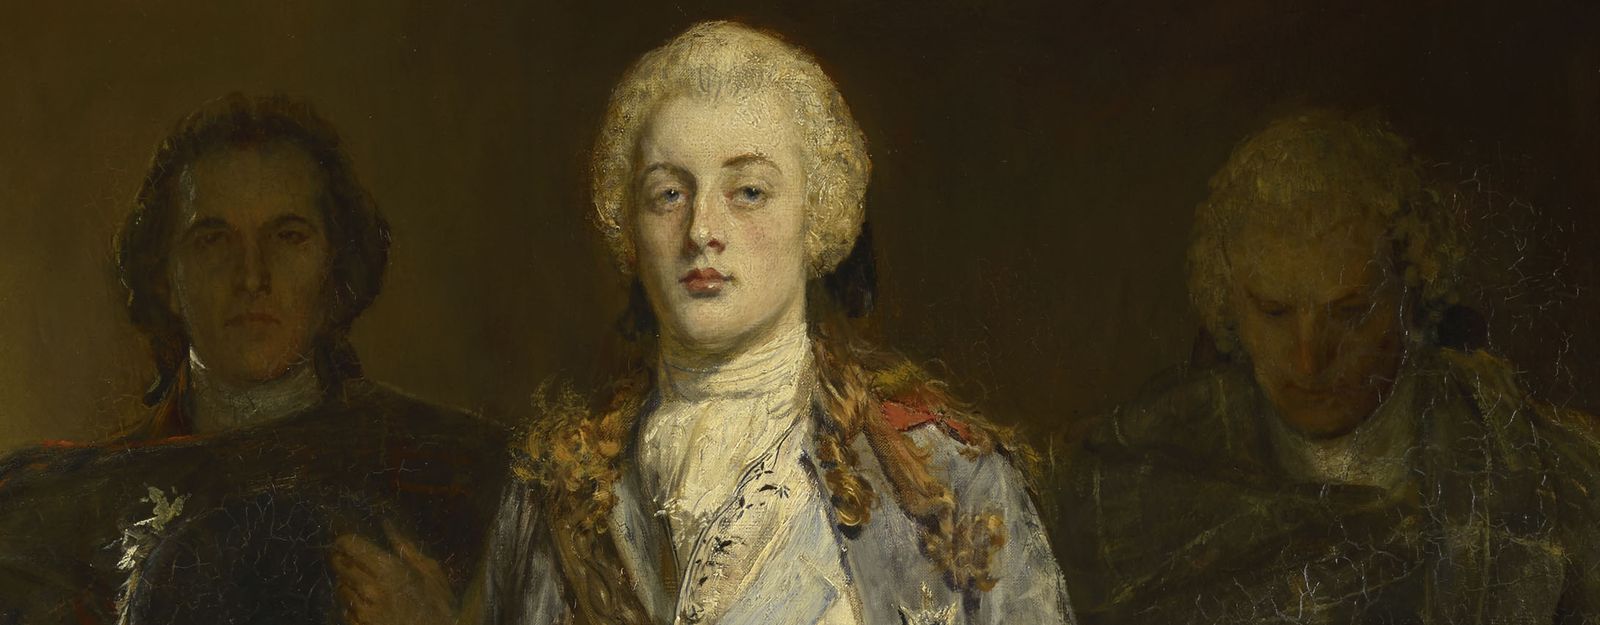 Painting of Bonnie Prince Charlie